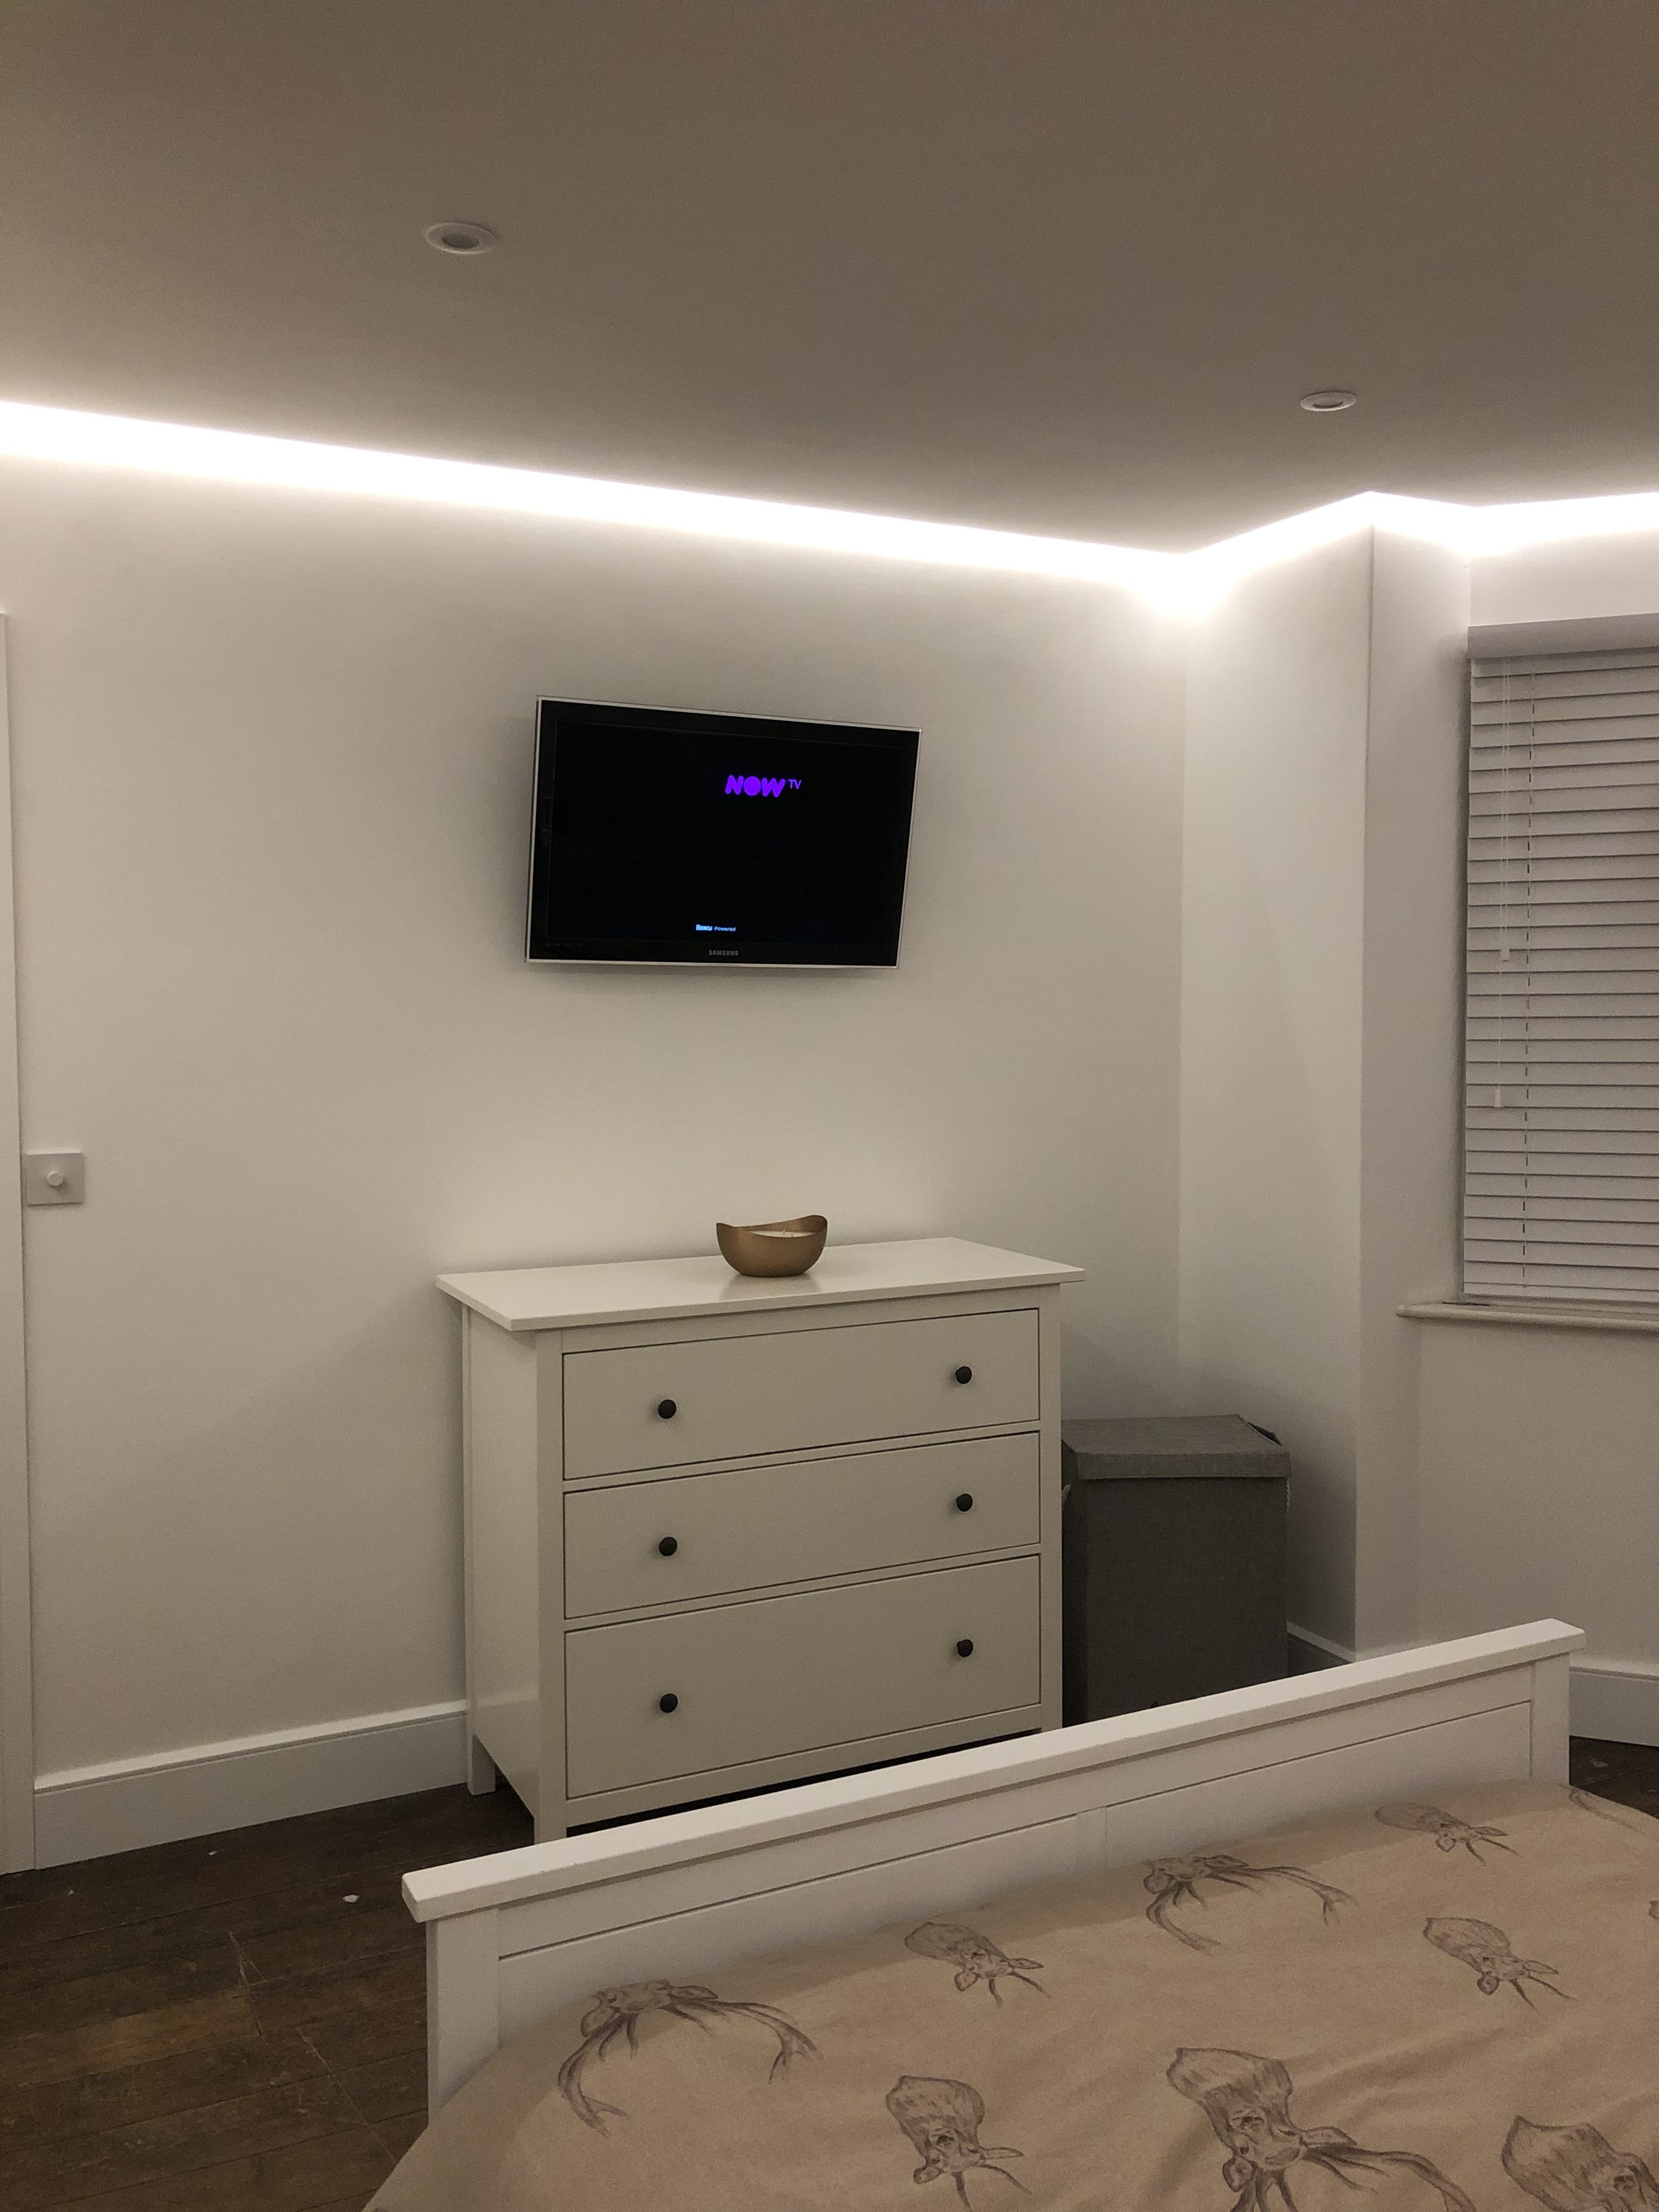 How To Position Your Led Strip Lights - How Do You Install Led Strip Lights On A Ceiling